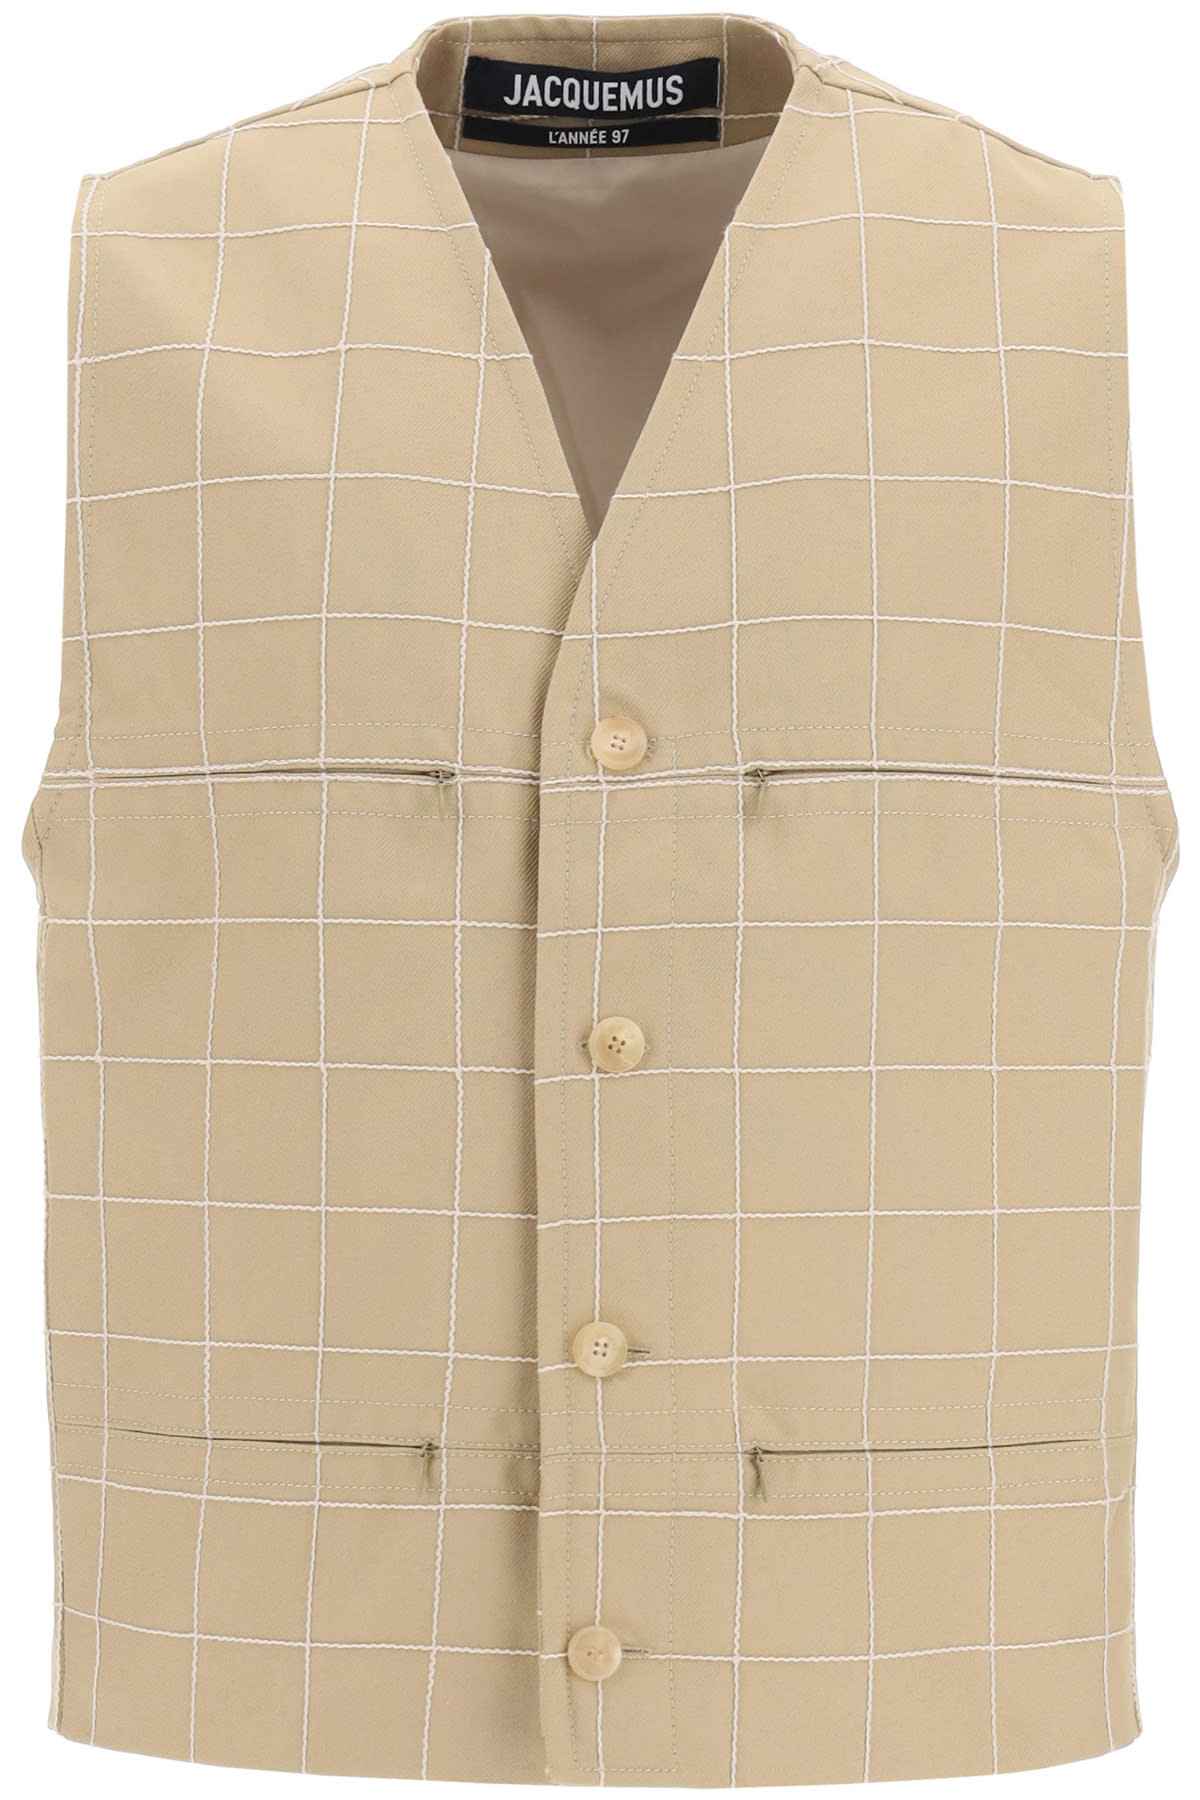 Jacquemus Embroidered Check Vest